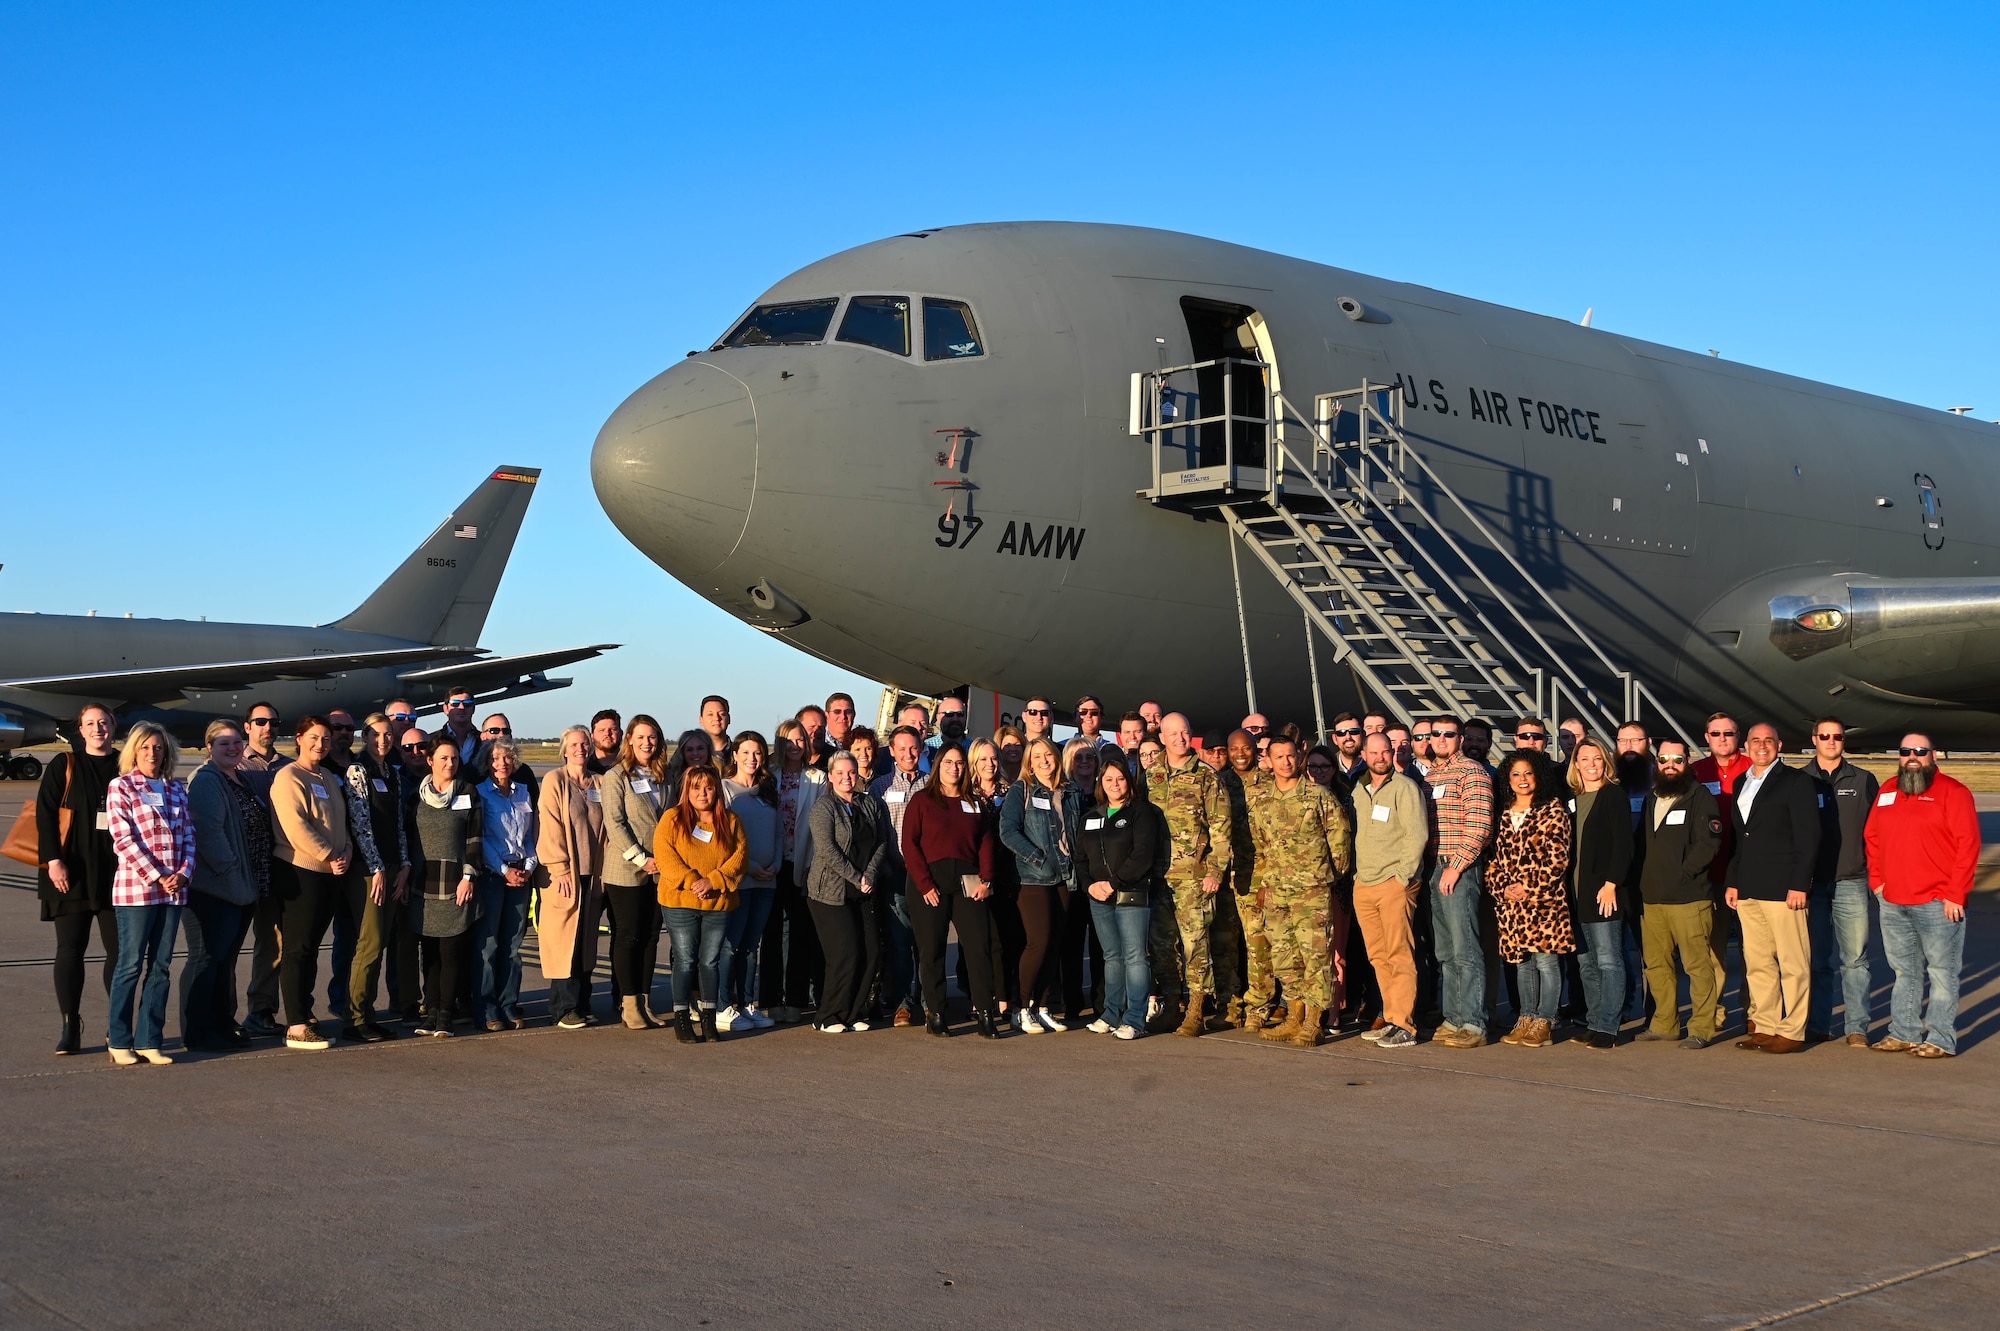 Community members from the local area pose for a group photo outside a KC-46 Pegasus at Altus Air Force Base, Oklahoma, Oct. 18, 2022. More than 60 community members attended the tour. (U.S. Air Force photo by Senior Airman Trenton Jancze)